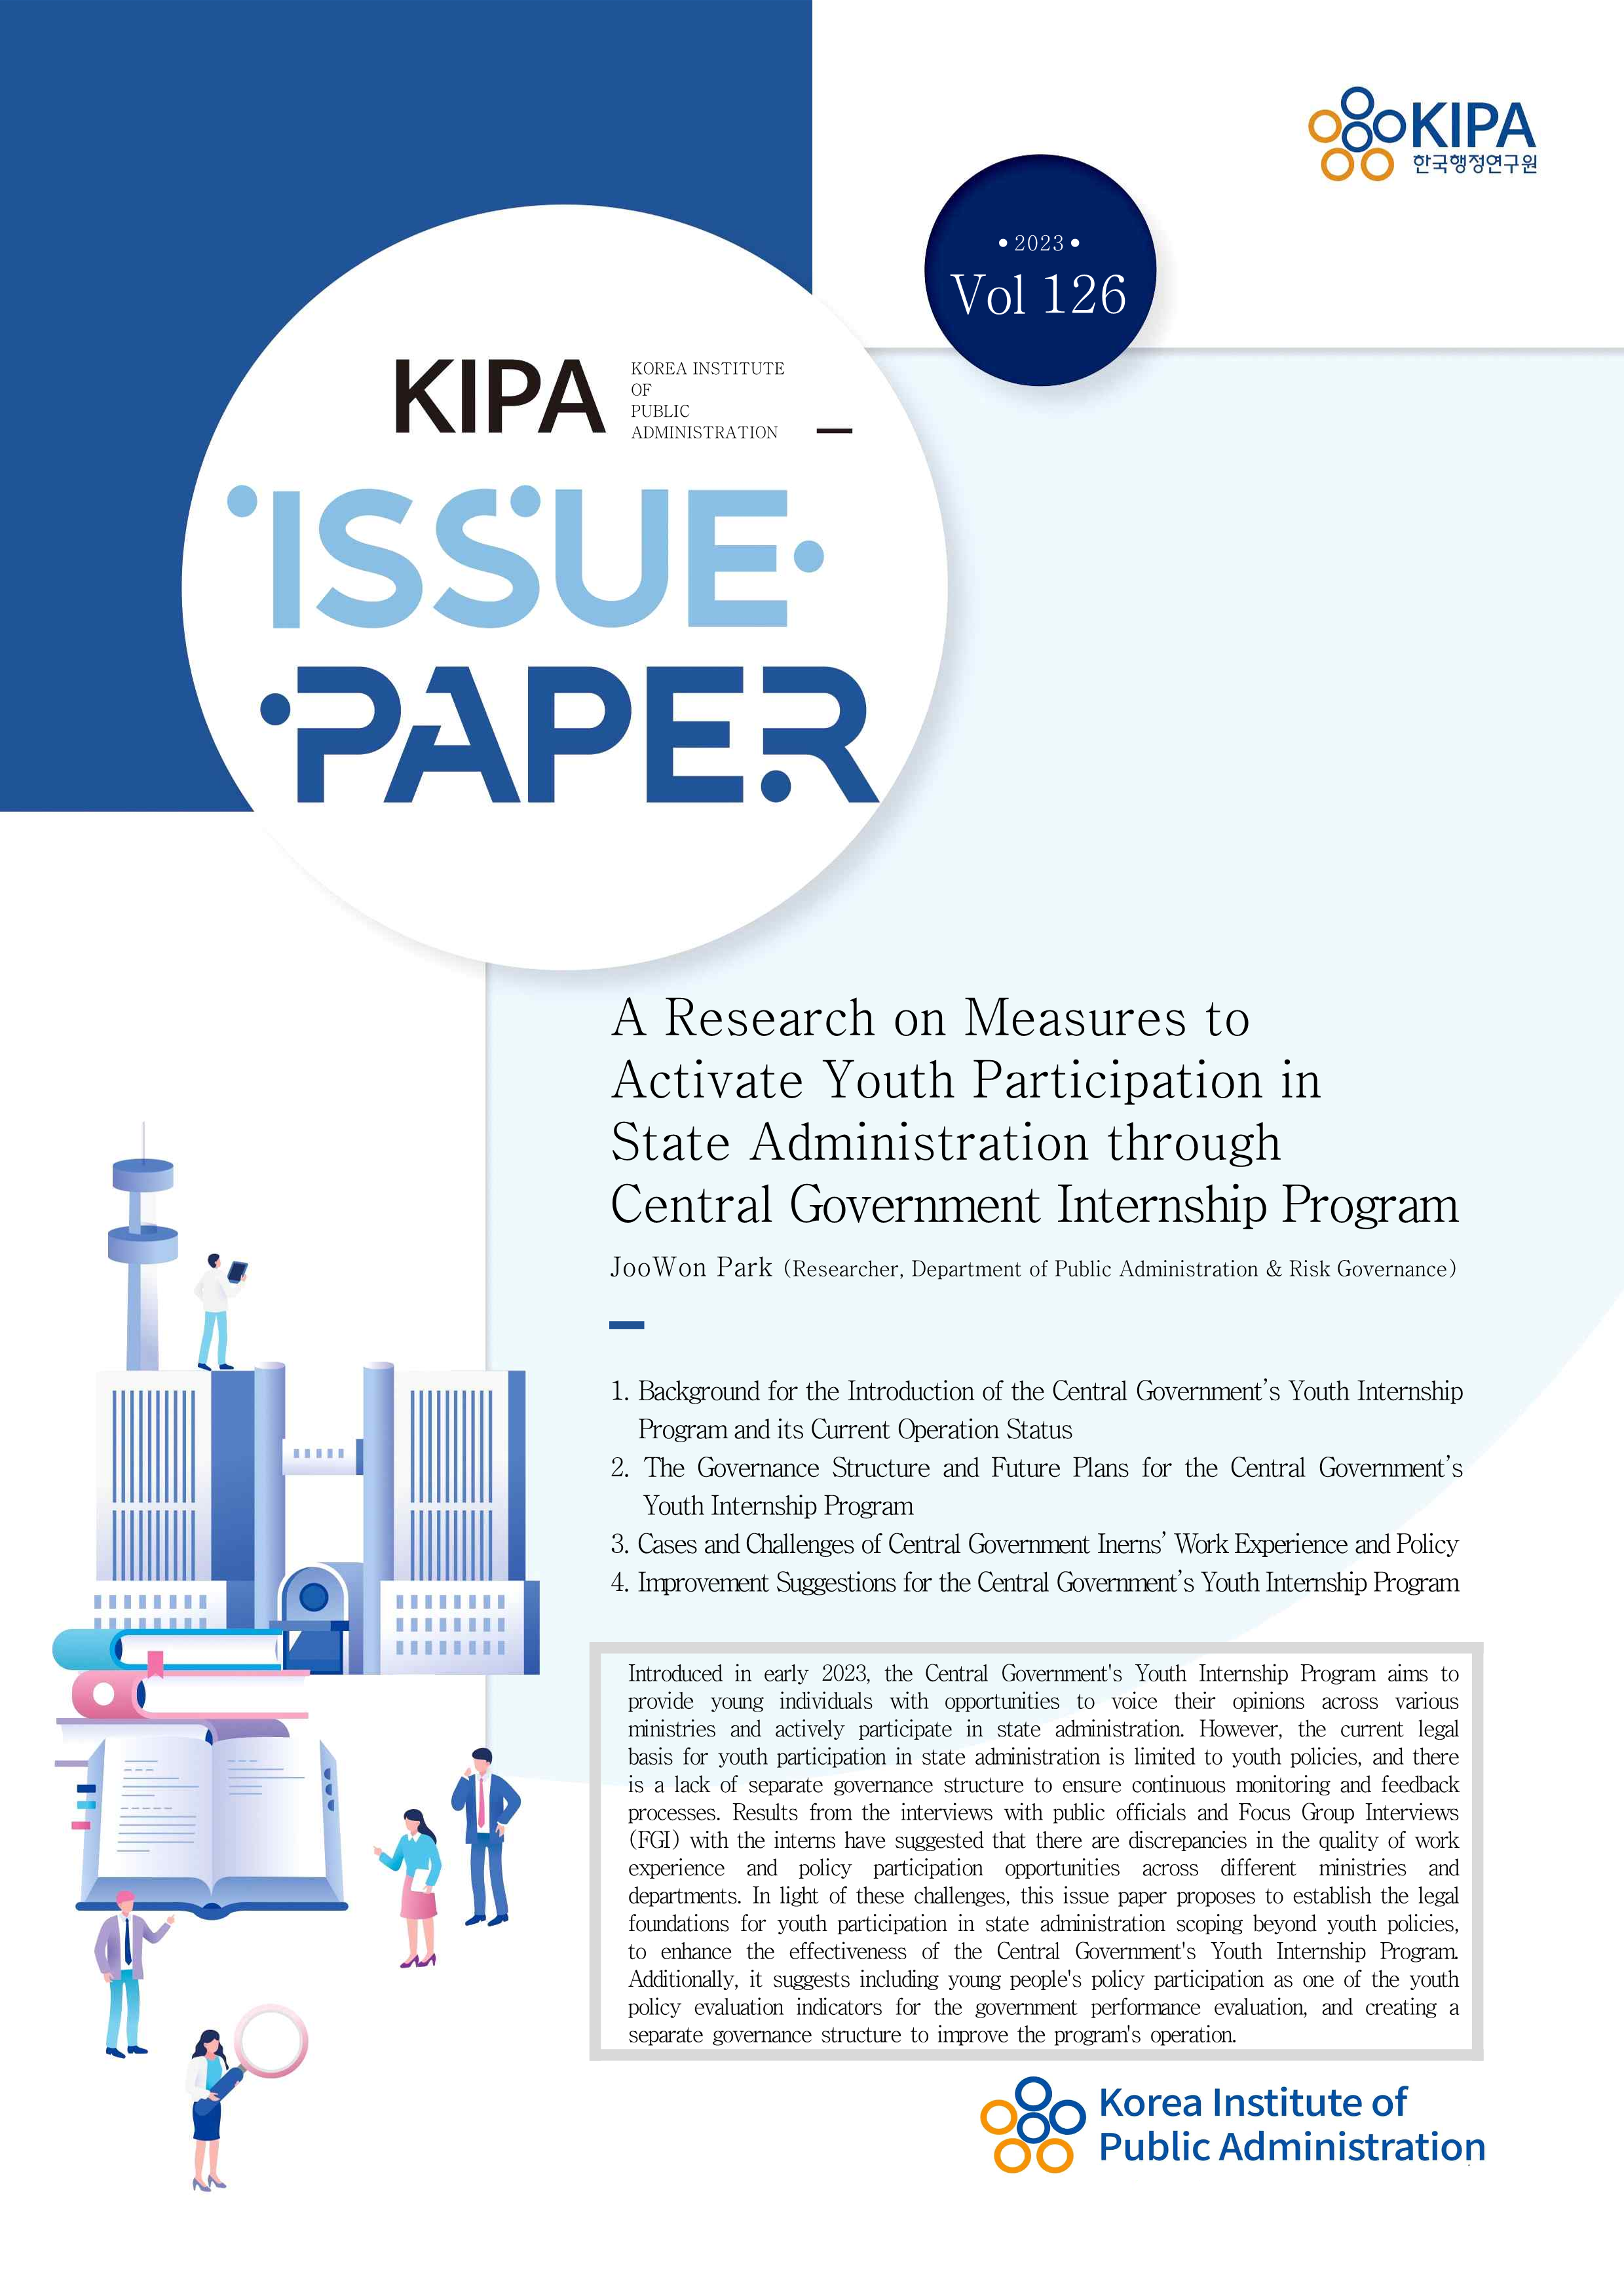 《Vol. 126》 A Research on Measures to Activate Youth Participation in State Administration through Central Government Internship Program